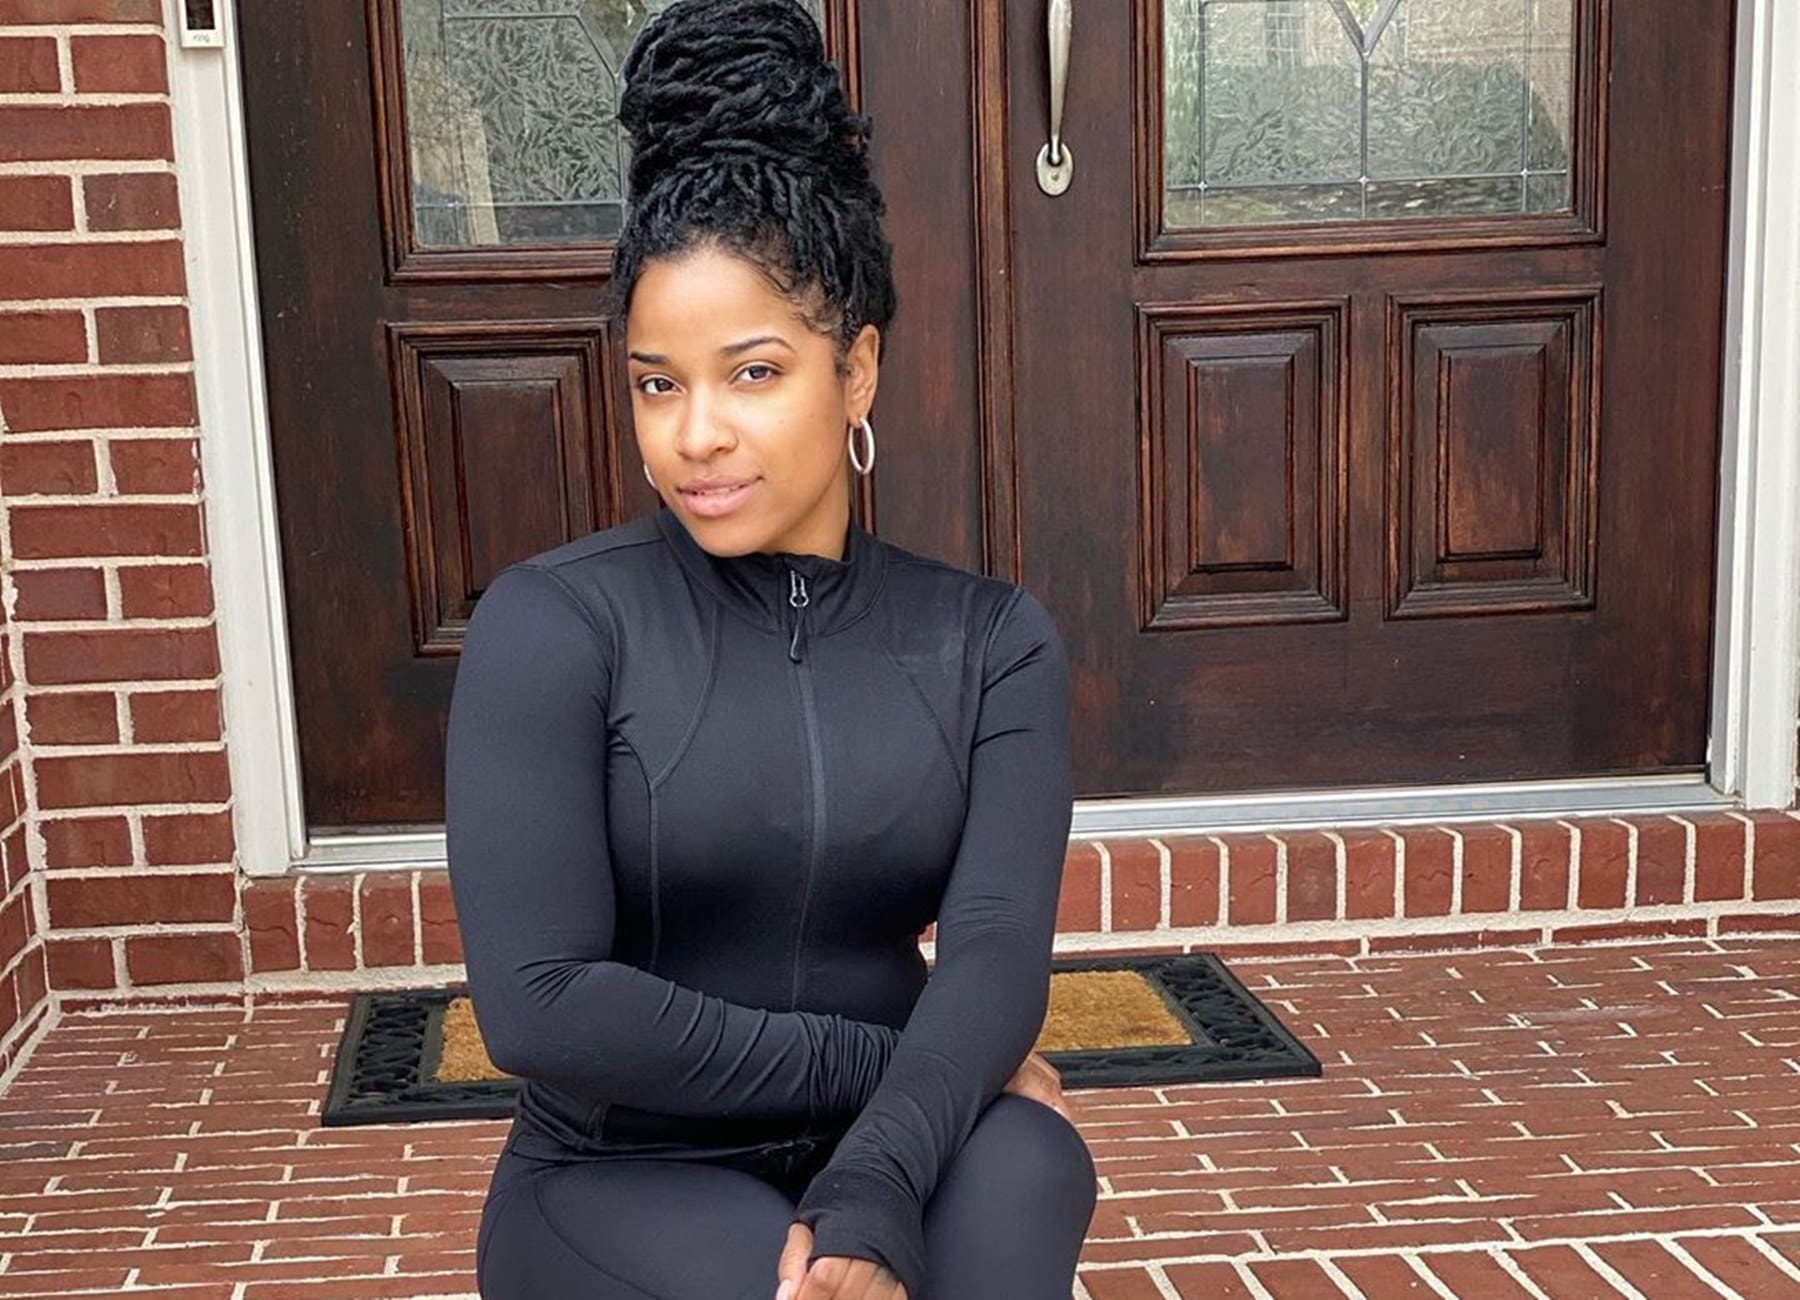 Toya Johnson Offers Fans A Hair Care Tip - Check Out Her Video